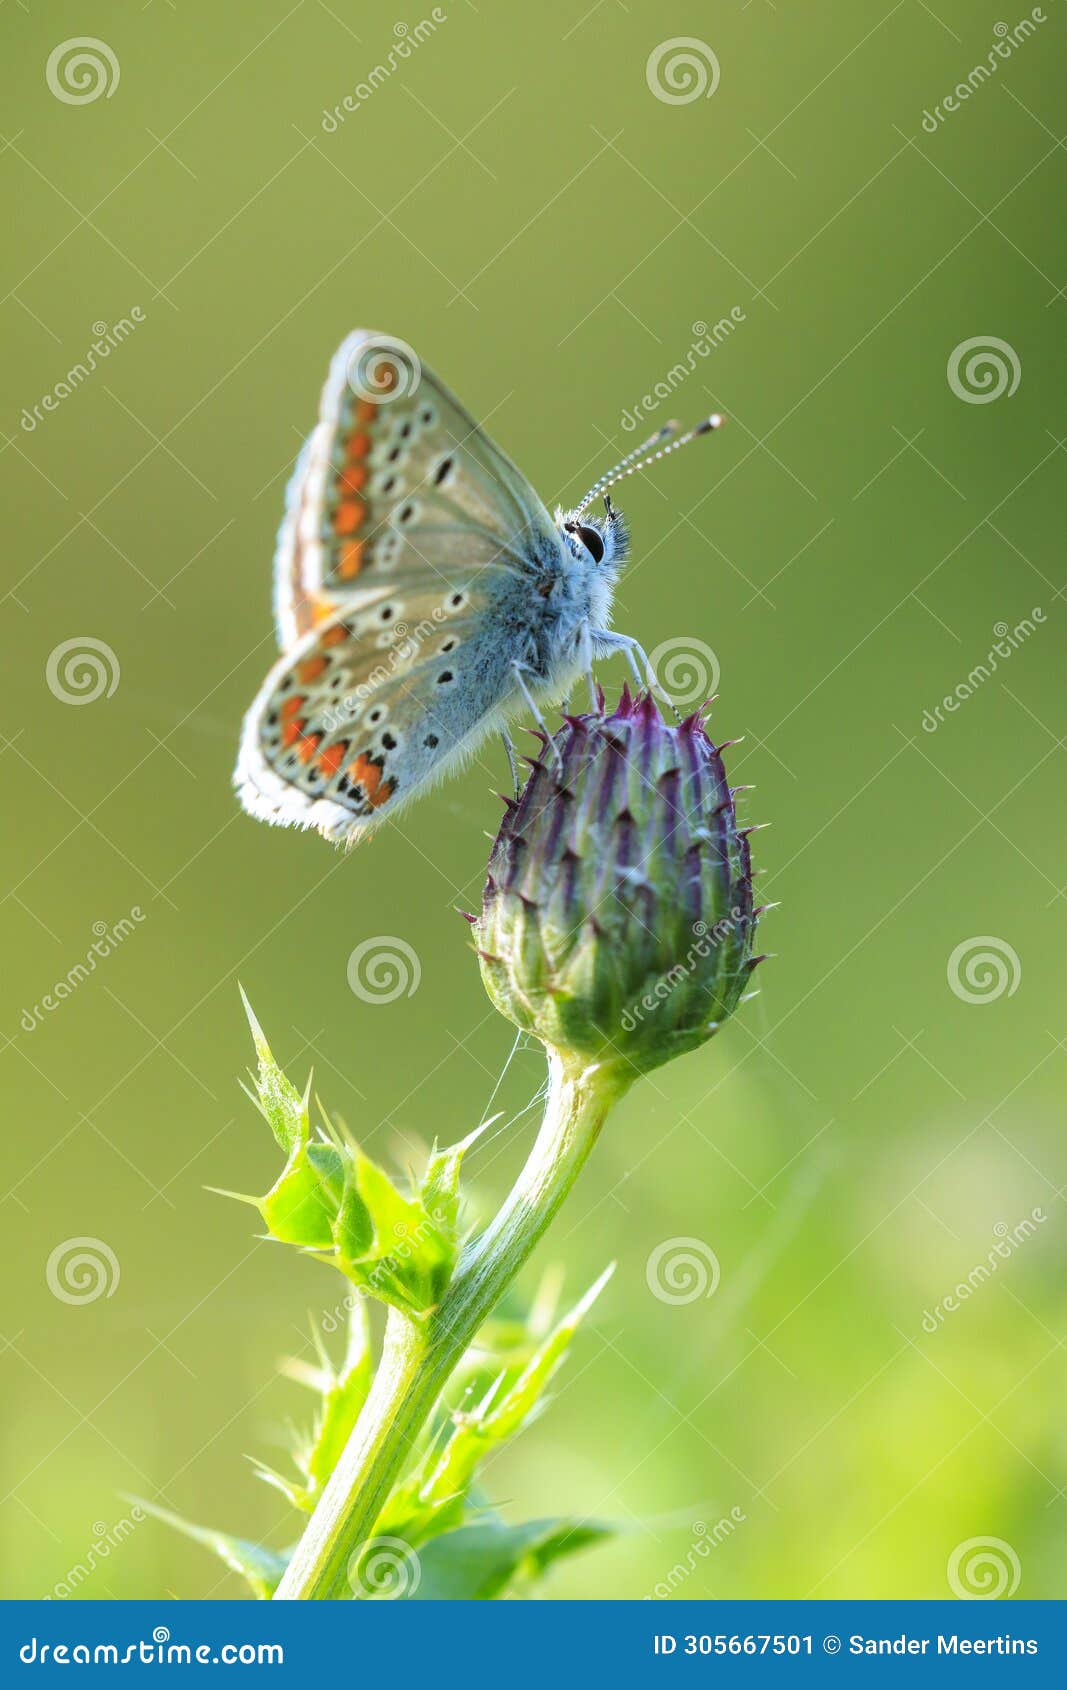 brown argus butterfly, aricia agestis, top view, open wings